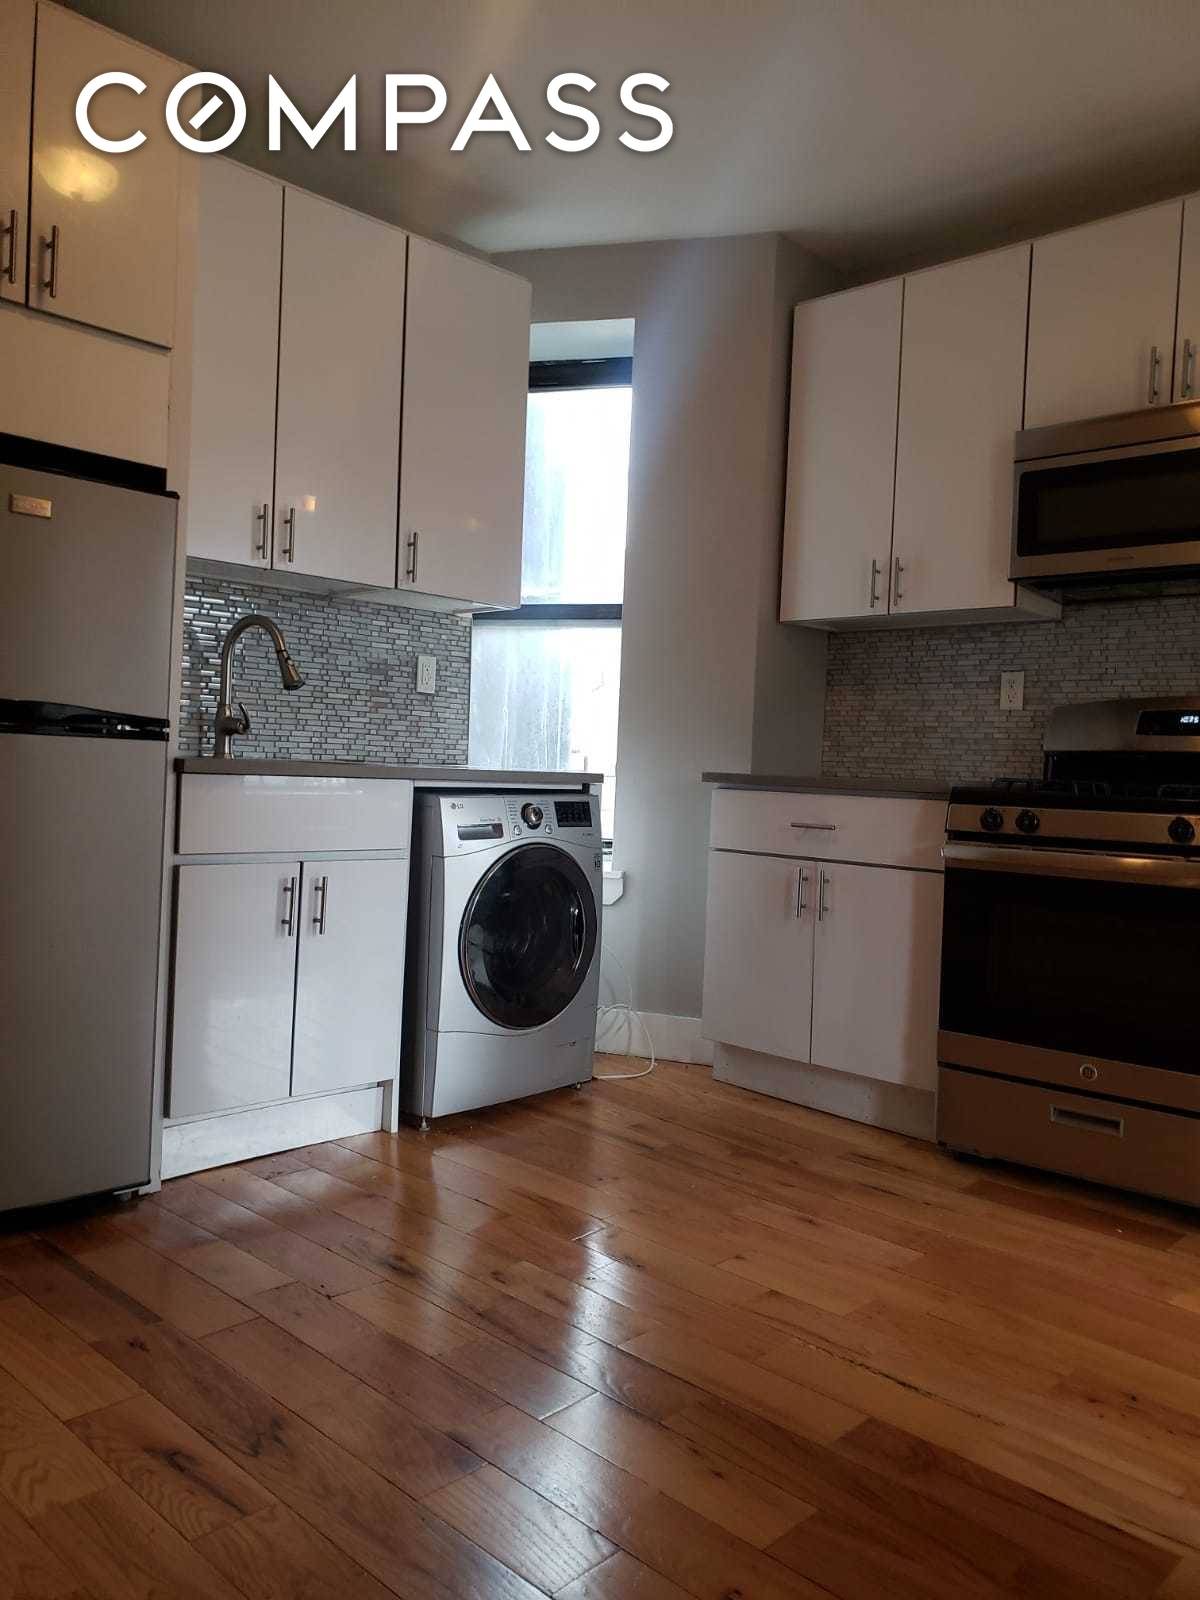 Full Sized Bedrooms Stainless steel Refrigerator Dishwasher Great Kitchen Excellent location in the Bronx Utilities included Heat and Hot water Friendly on site super.